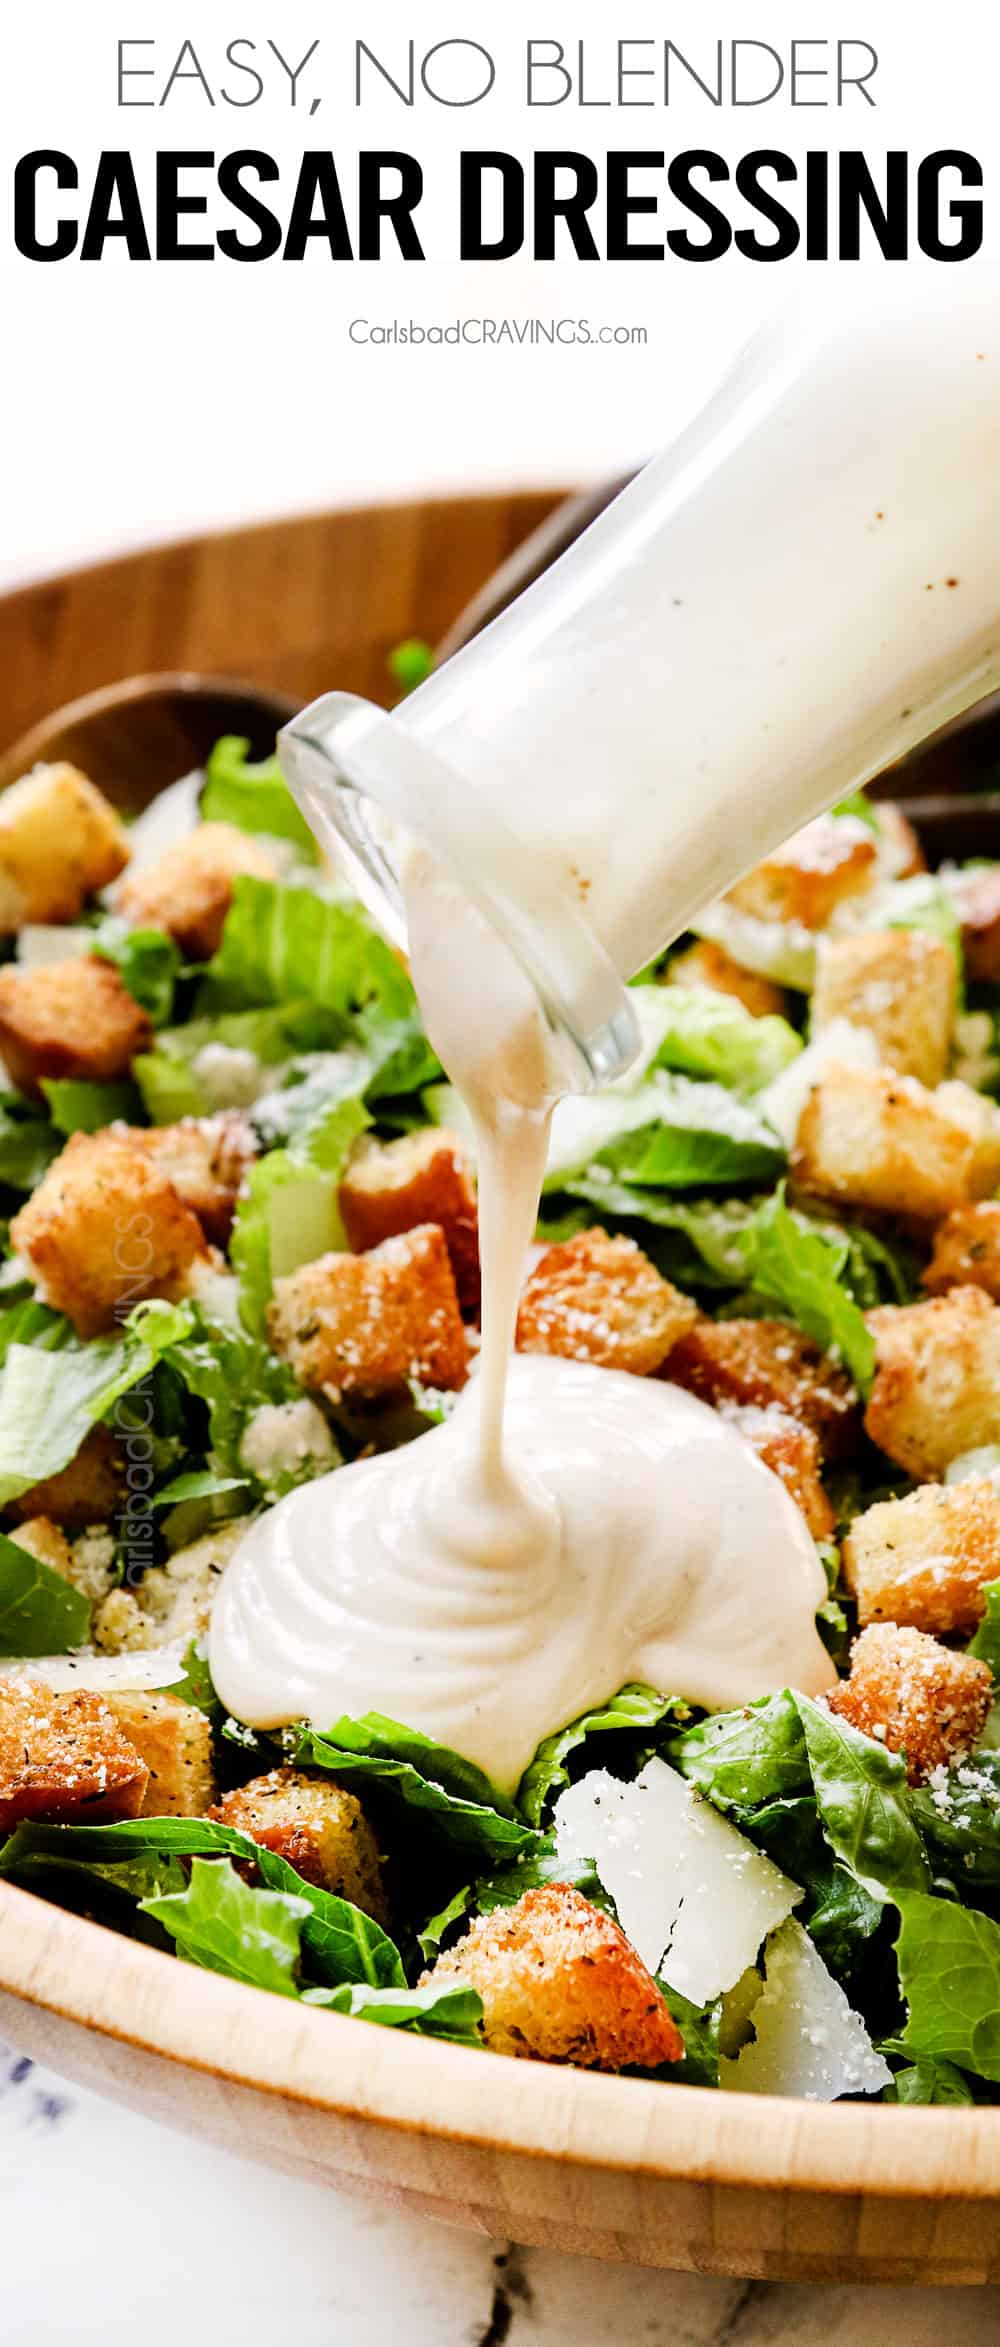 pouring Caesar dressing of salad with croutons and Romaine lettuce